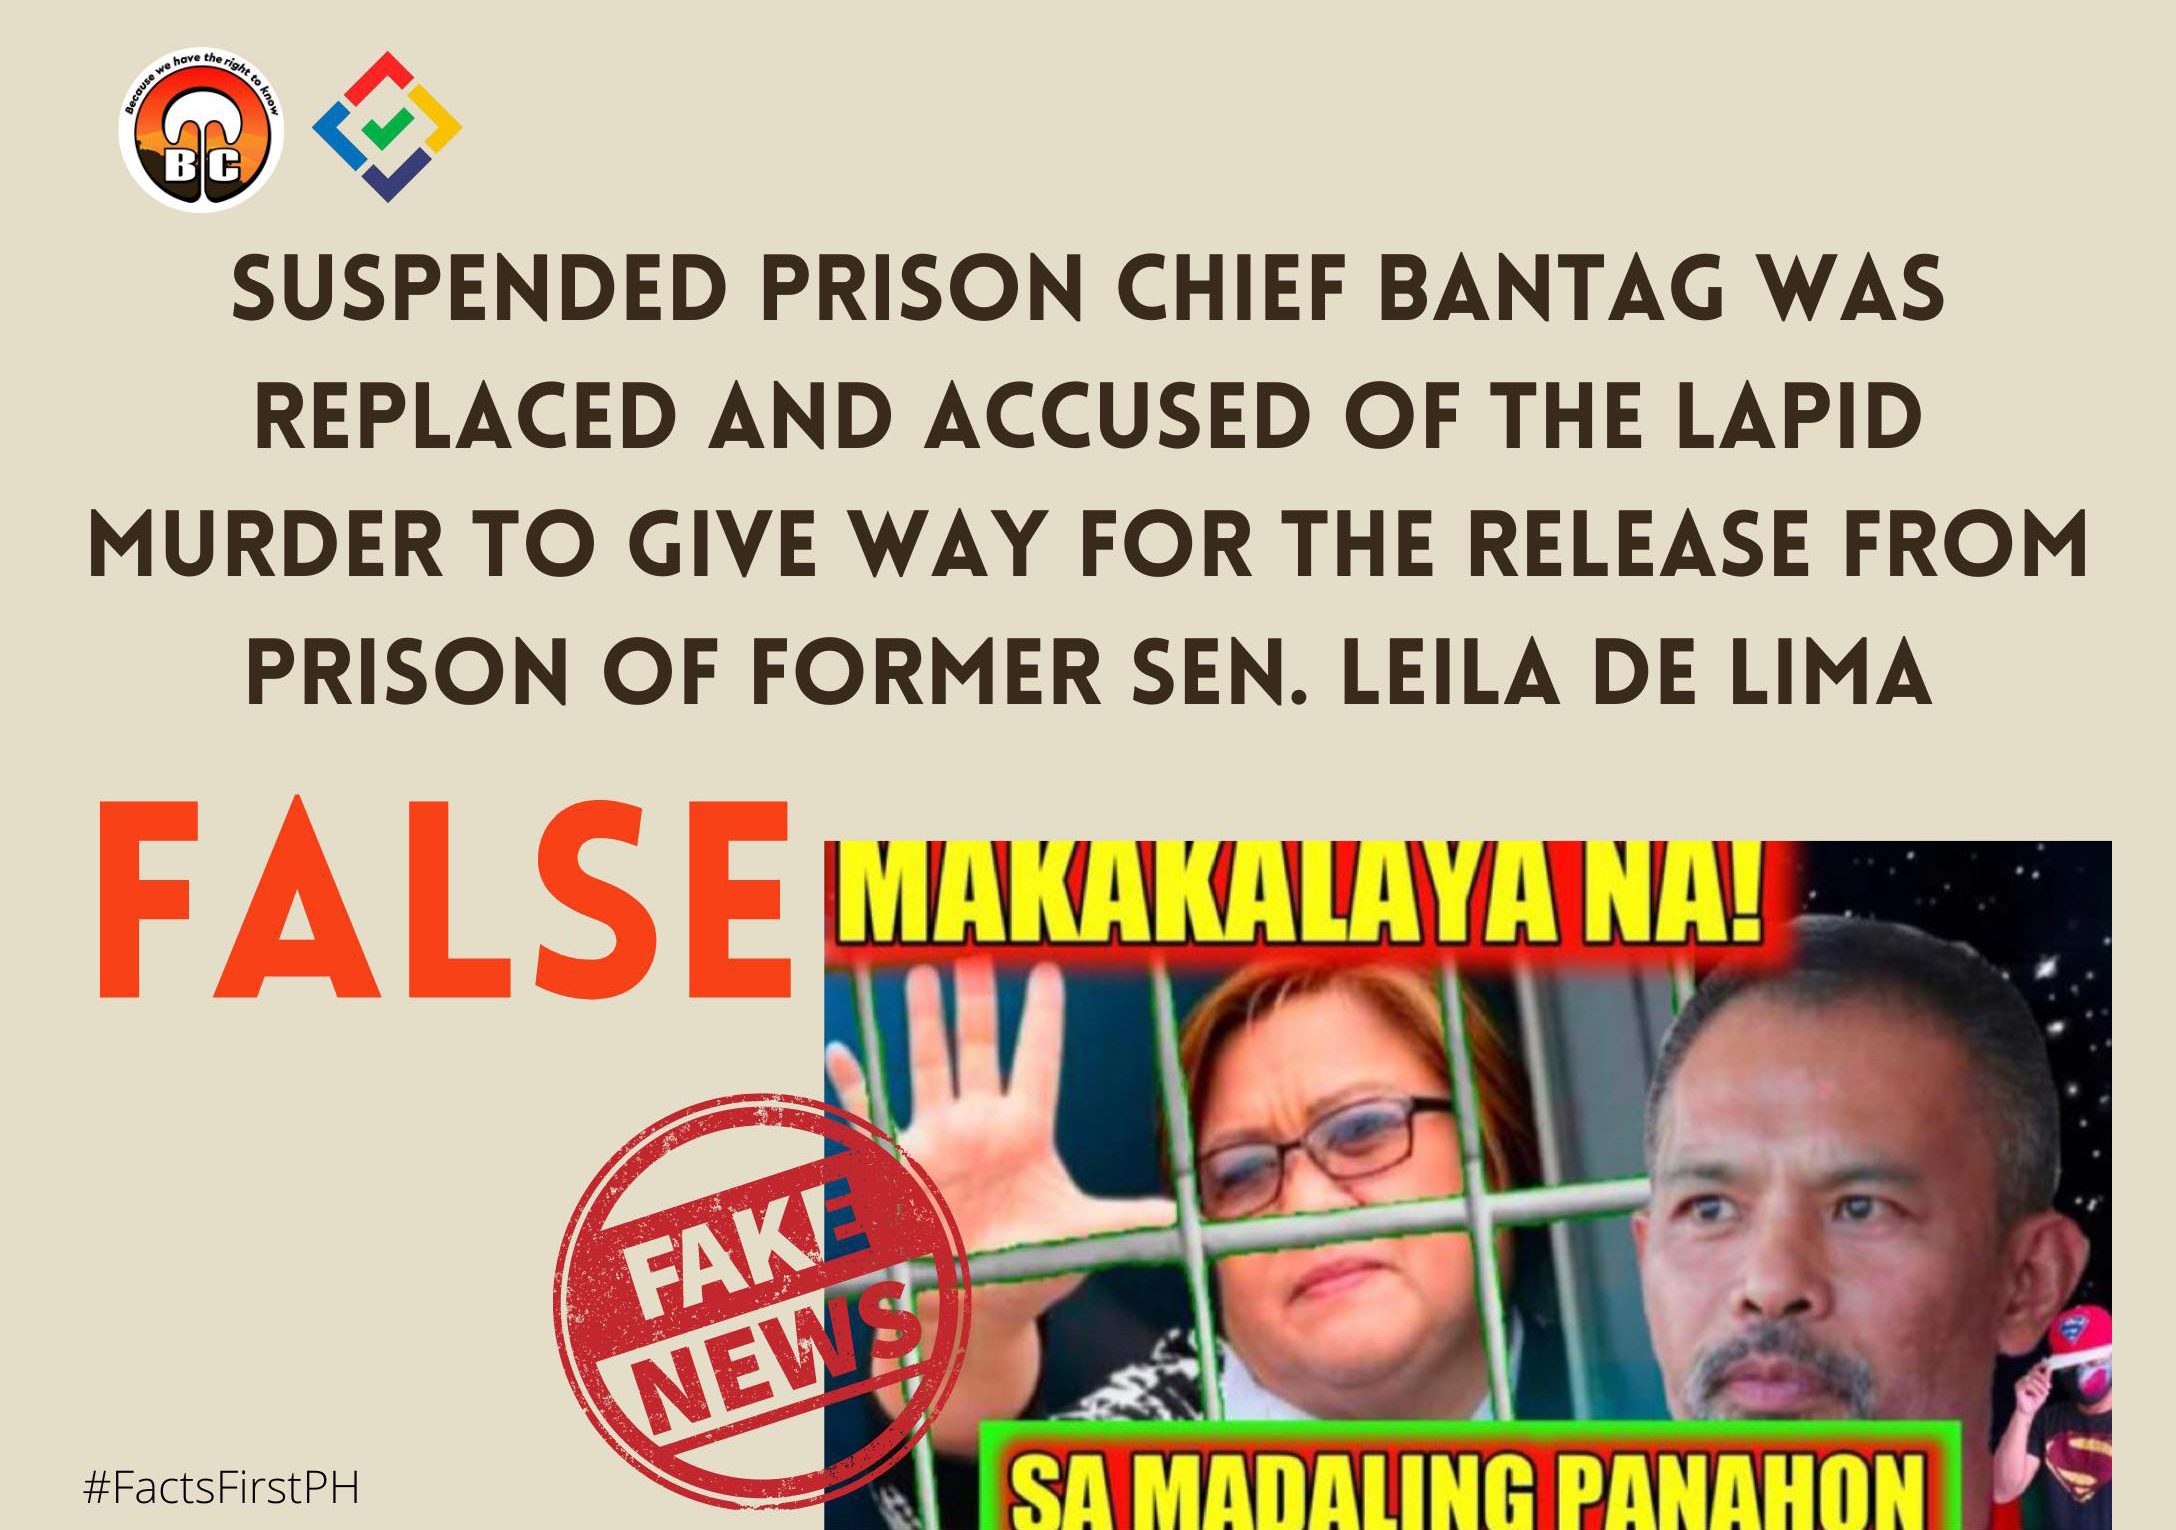 Fact Check: Suspended Prison Chief Bantag was replaced and accused of the Lapid murder to give way for the release from prison of former Sen. Leila de Lima